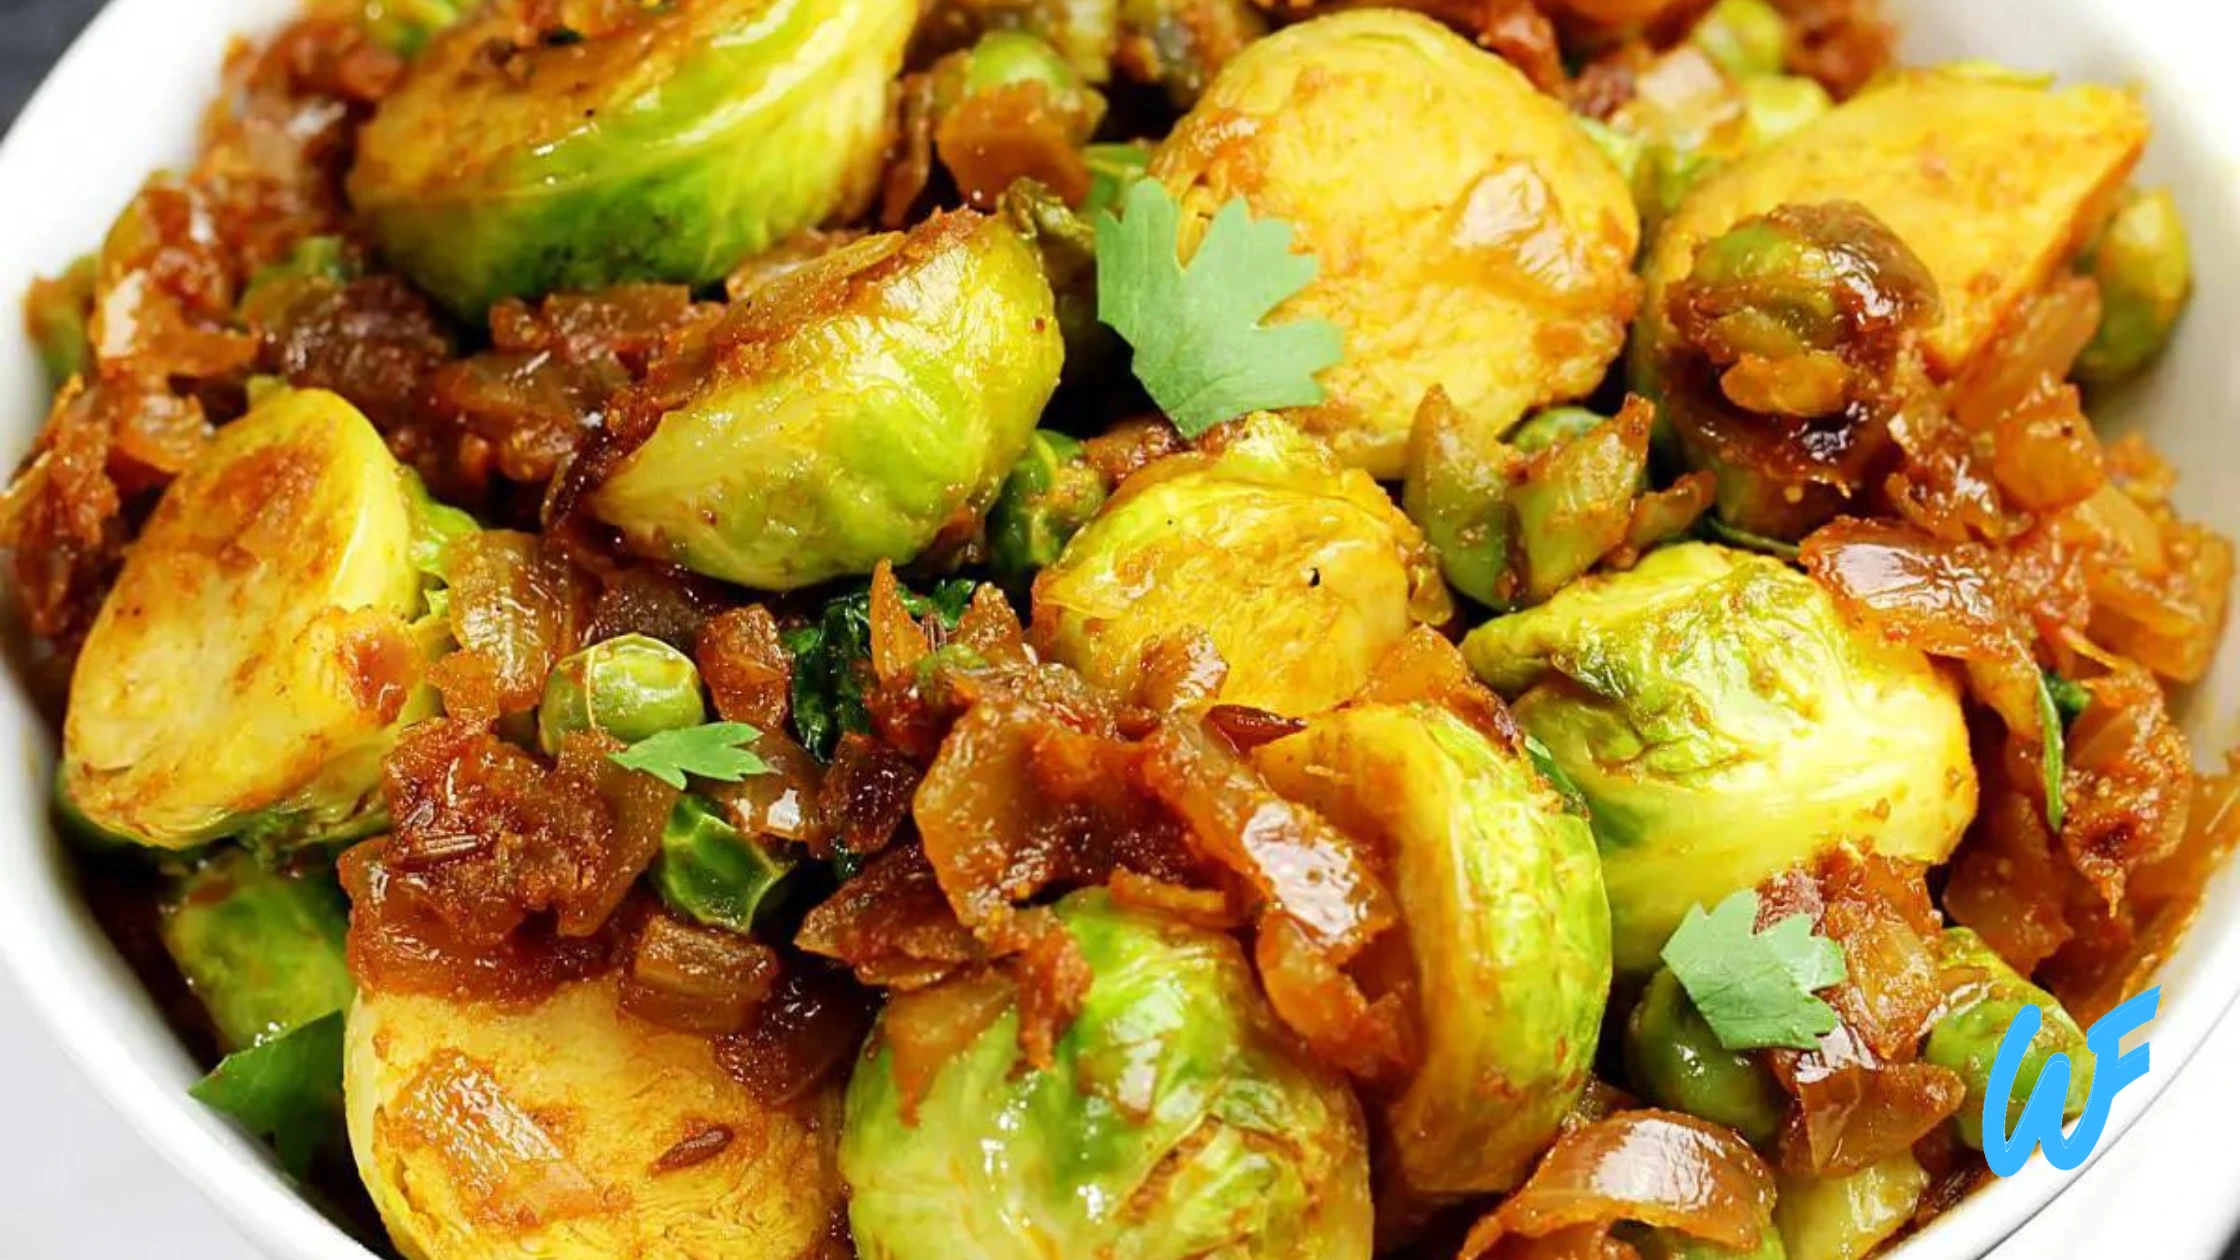 You are currently viewing Curried Brussels Sprouts and Carrot Stir-Fry